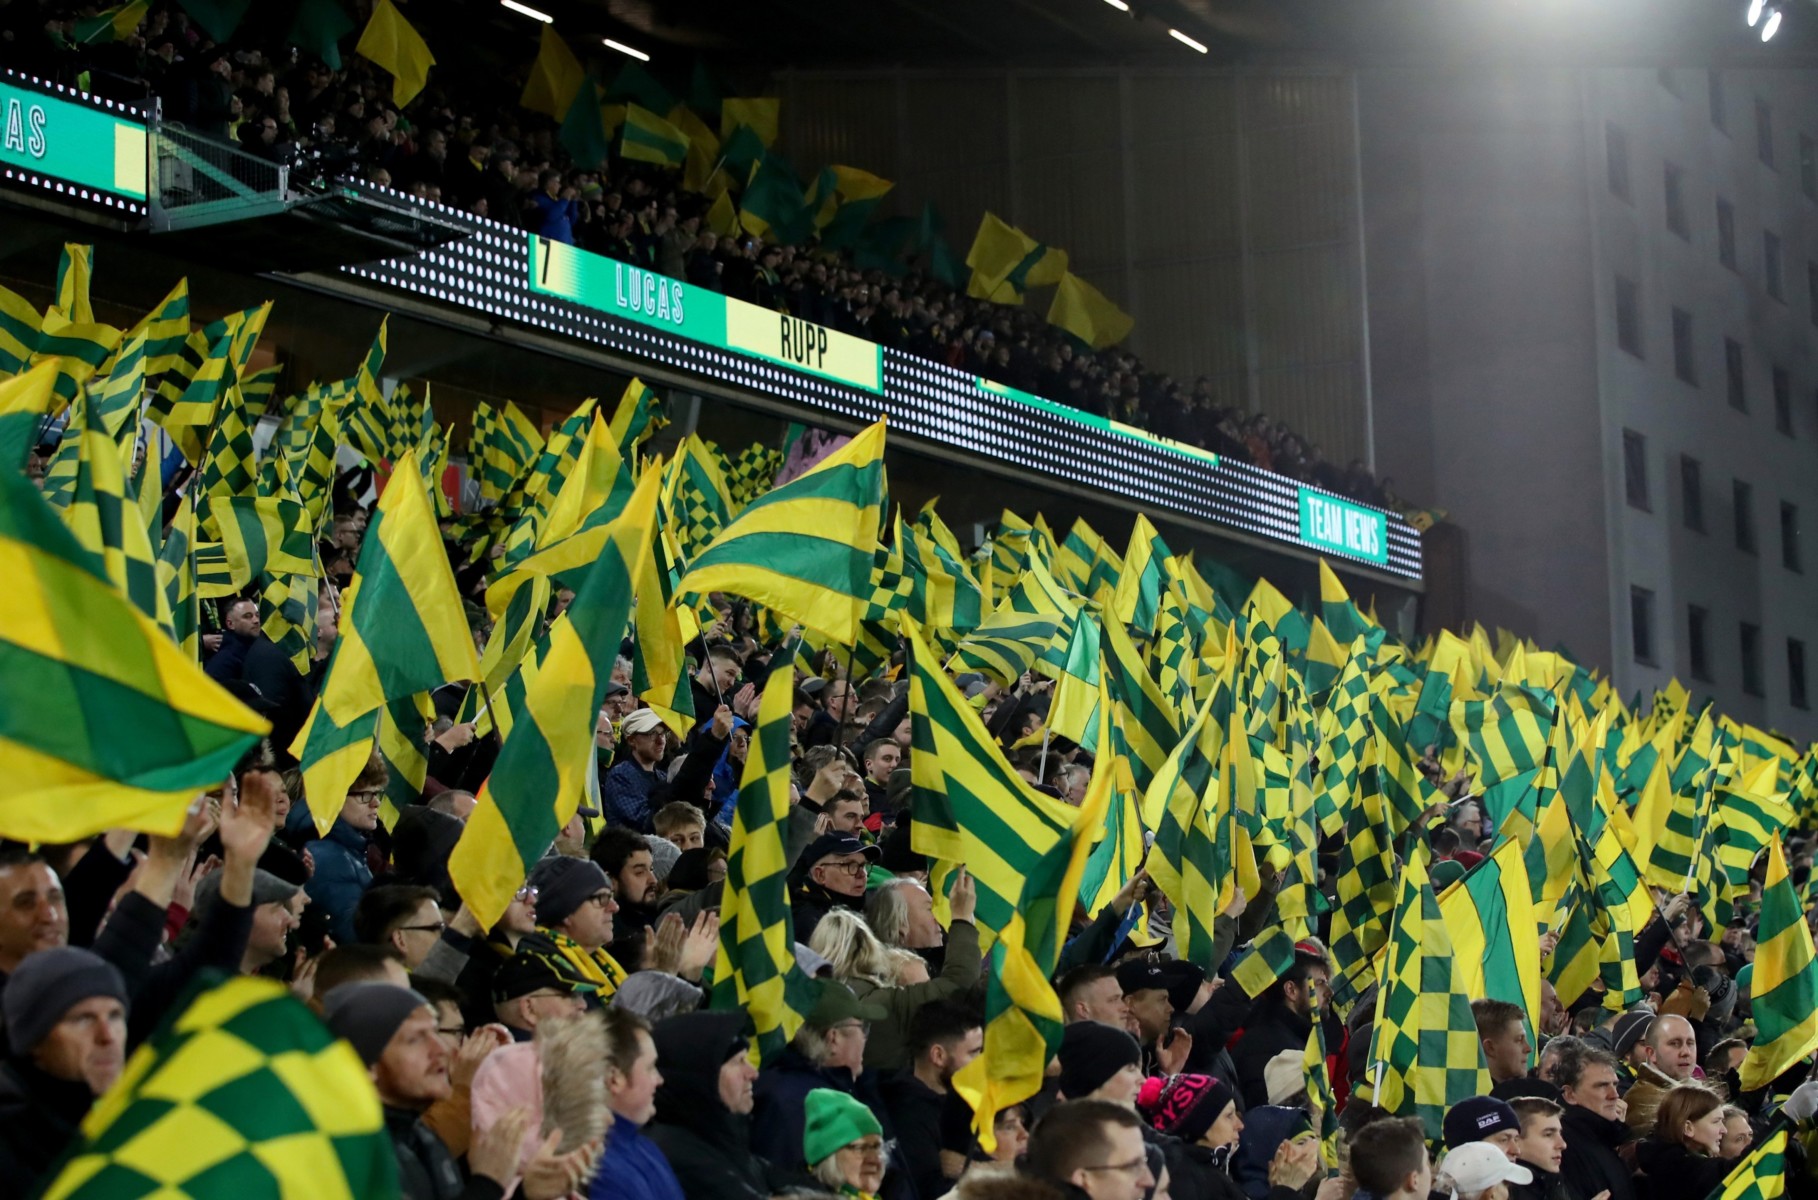 A study into all top 20 clubs found Canaries supporters were least likely to get a hook-up on dating site Tinder